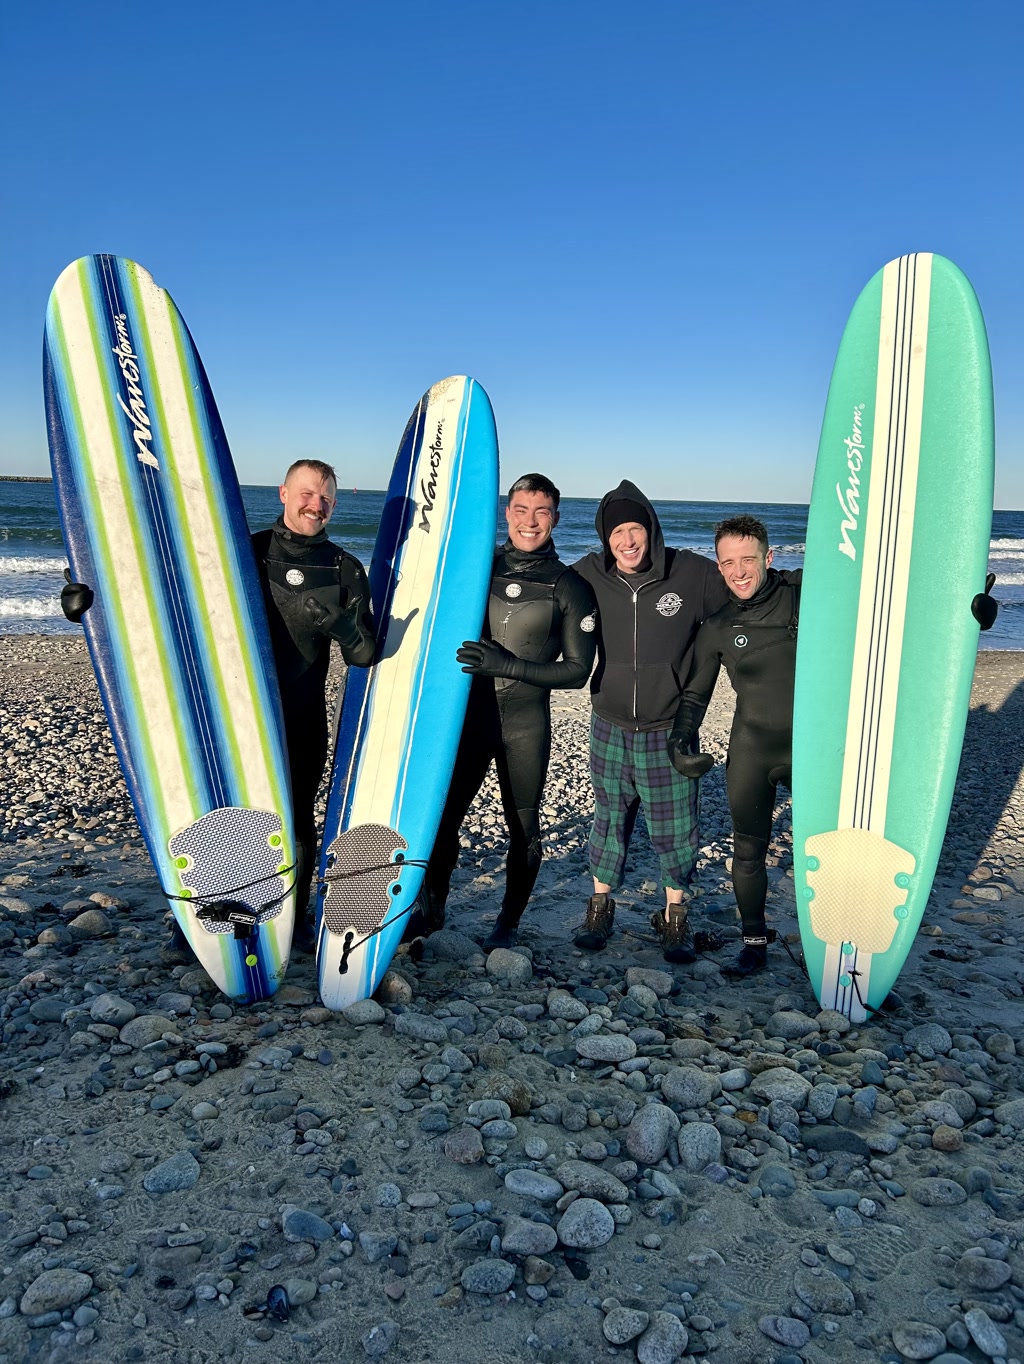 Four people are standing on a pebble-covered beach, each holding a surfboard vertically. They are wearing thick wetsuits, gloves, and booties, suggesting cold weather. The surfboards are colorful, ranging from blue to green shades, and appear to be made of sturdy foam, designed for buoyancy and stability. The sky is clear and blue indicating it's a sunny day, and the ocean is visible in the backdrop. The group is smiling and appears to be enjoying the moment. There is a mix of calmness and excitement evident in their postures.